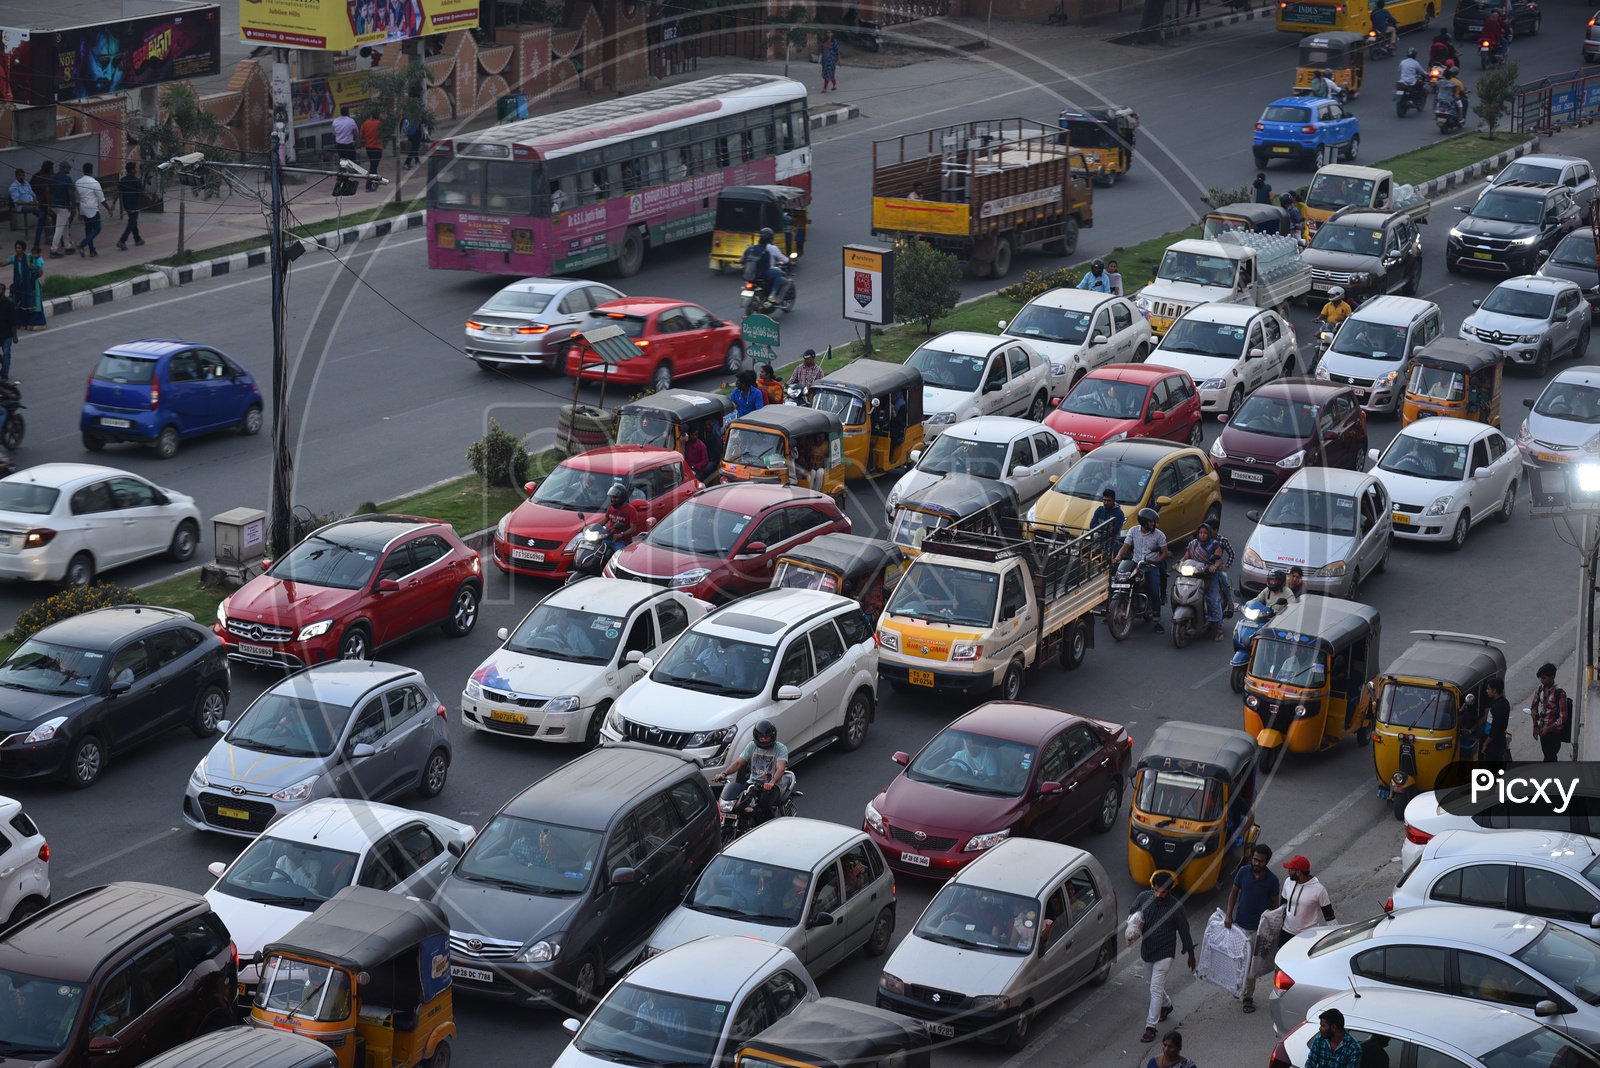 Traffic Jam In An Urban City At a Traffic Signal With Cars, Bikes And Autos Stranded